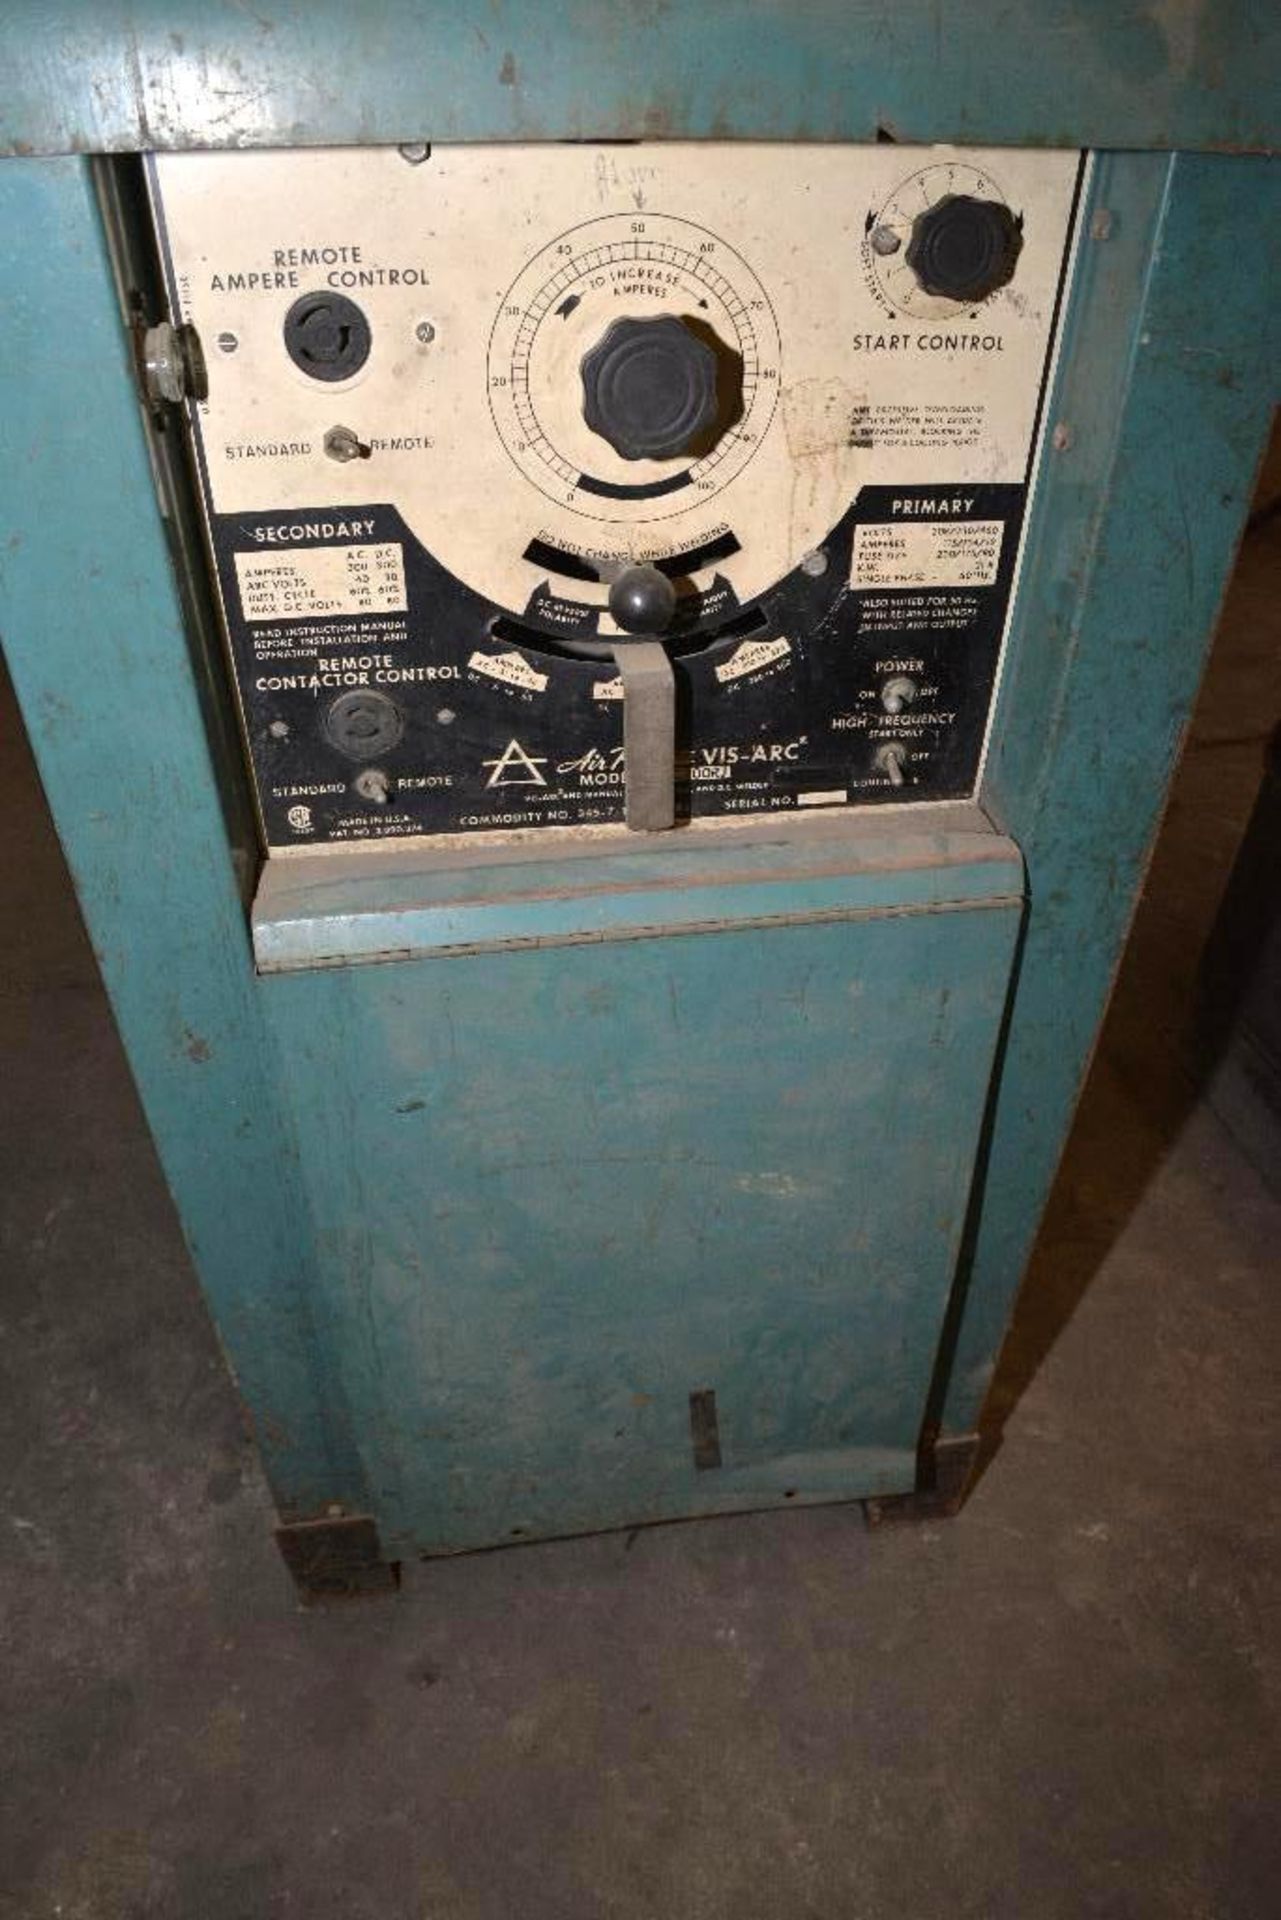 AIR PRODUCTS DIS-ARC WELDER MODEL: THRFC300RJS/N: 1526448 SINGLE PHASECONDITION UNKNOWN - Image 2 of 3